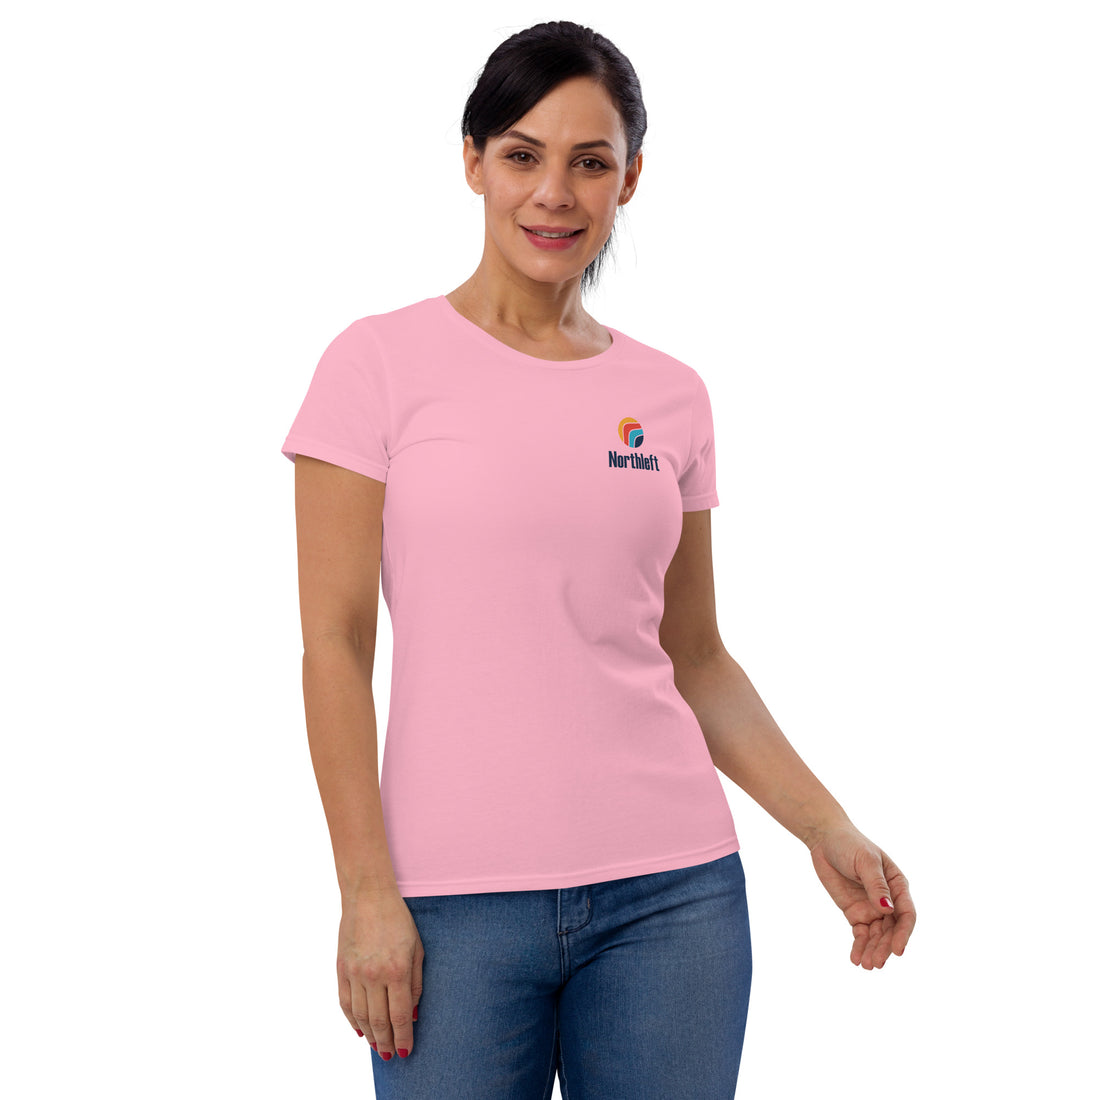 Women's Northleft Fashion Fit Tee